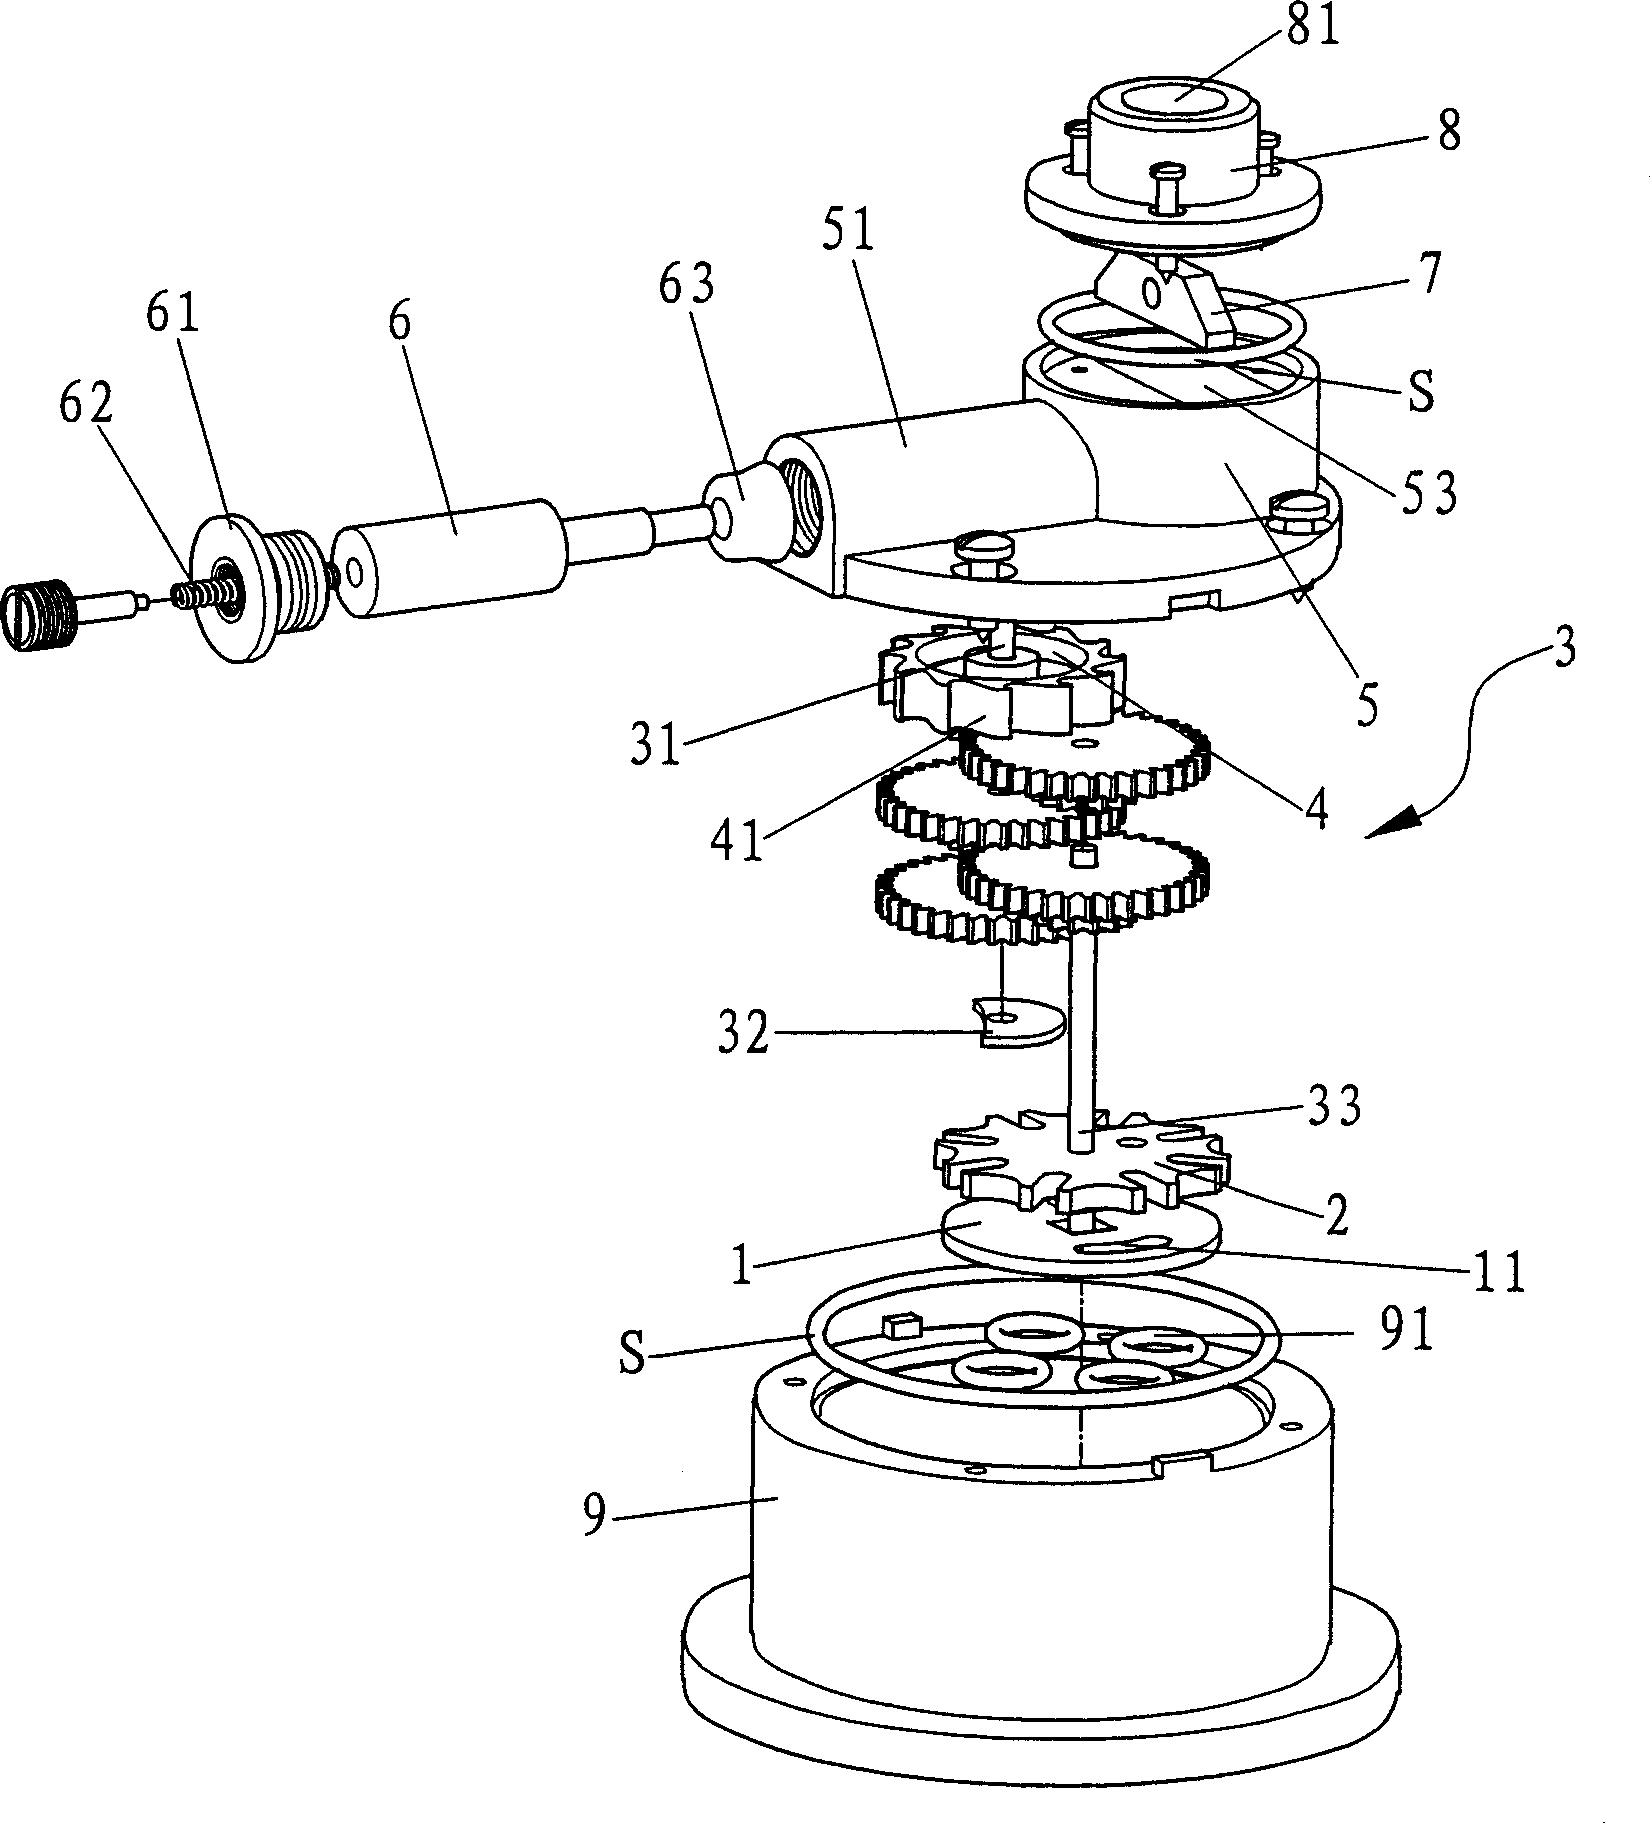 Discharge switching device for multifunctional shower nozzle